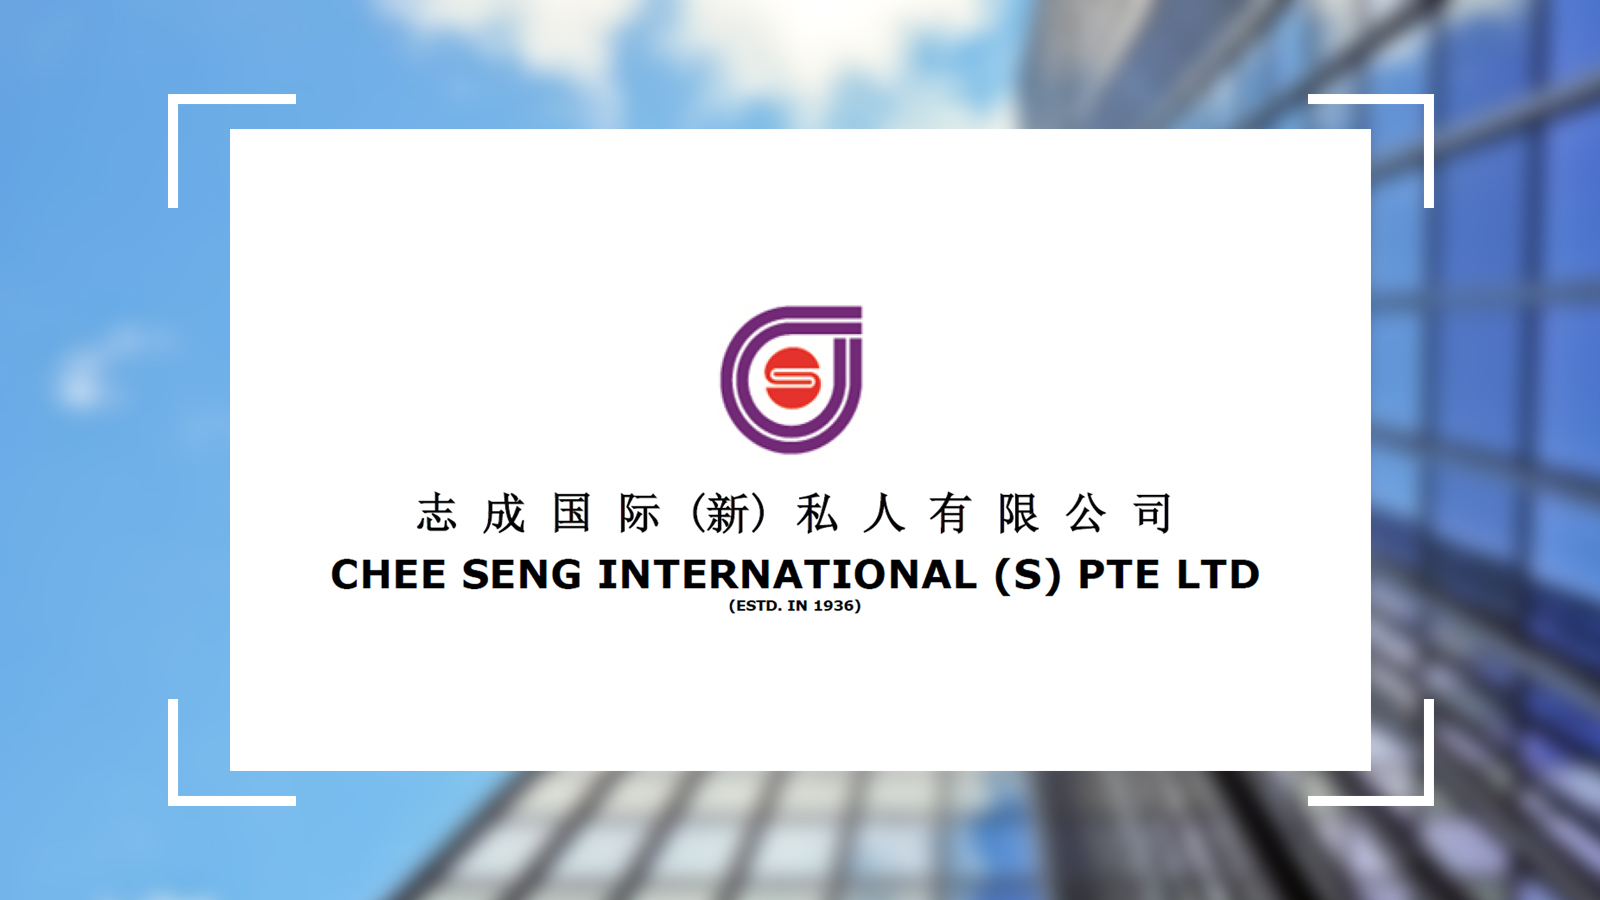 Commendation from Chee Seng International